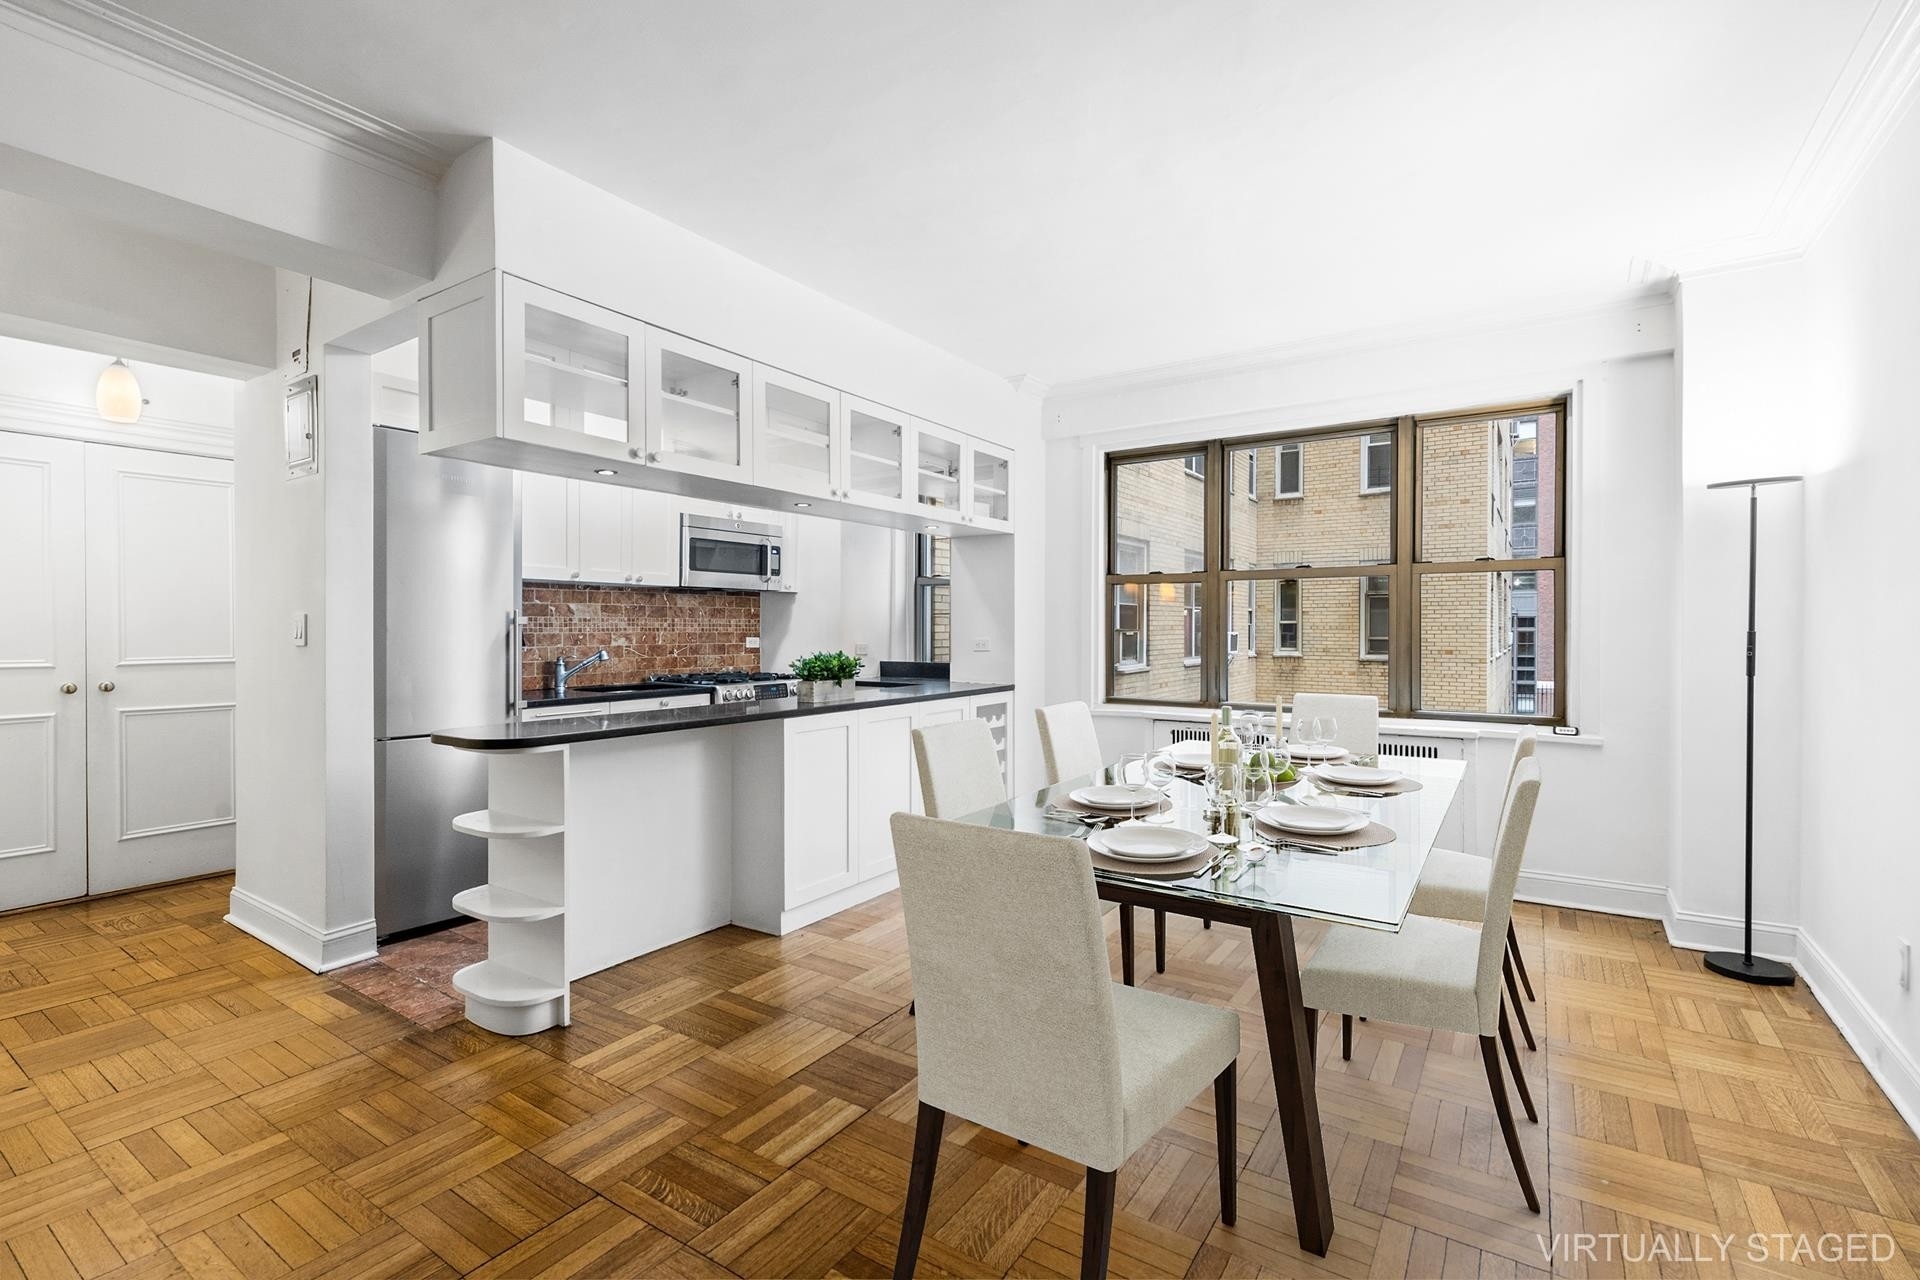 Co-op Properties for Sale at John Murray House, 220 MADISON AVE, 4L Murray Hill, New York, NY 10016